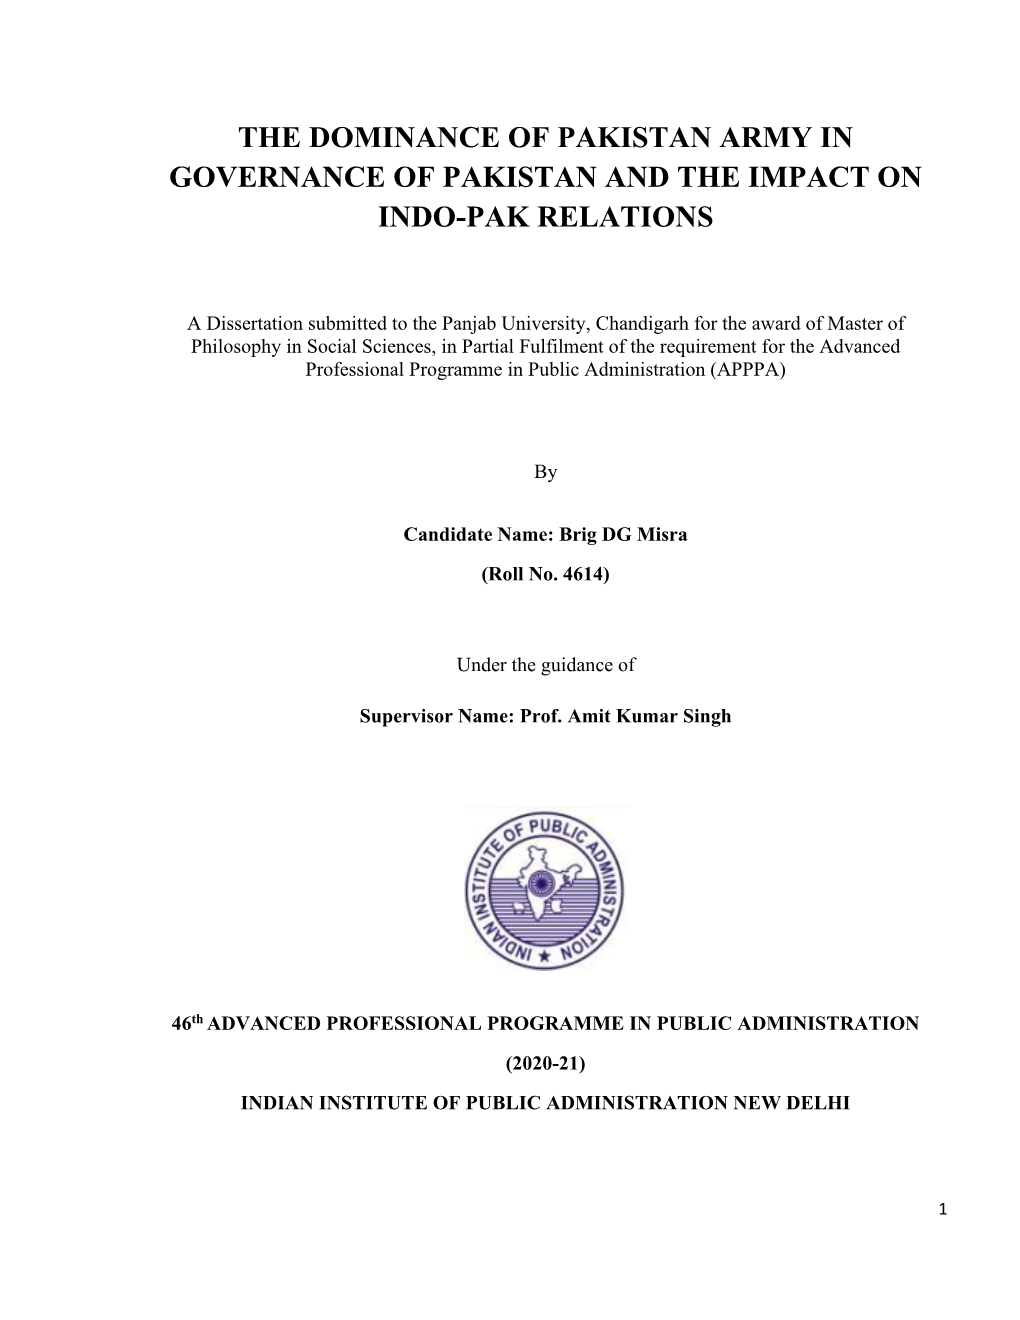 The Dominance of Pakistan Army in Governance of Pakistan and the Impact on Indo-Pak Relations